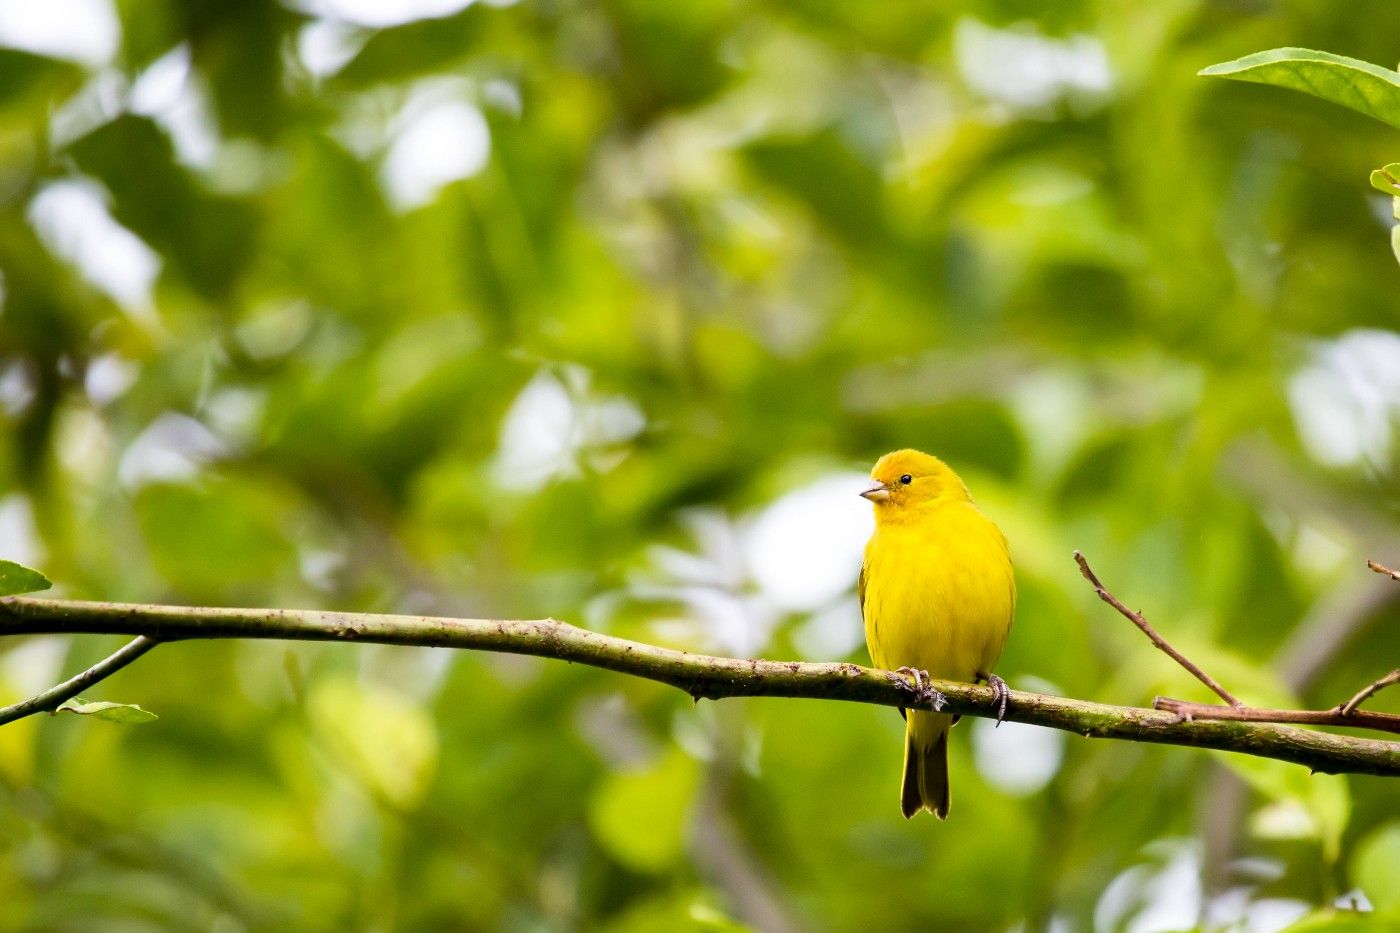 Cryptocurrency: The Canary in the Coal Mine